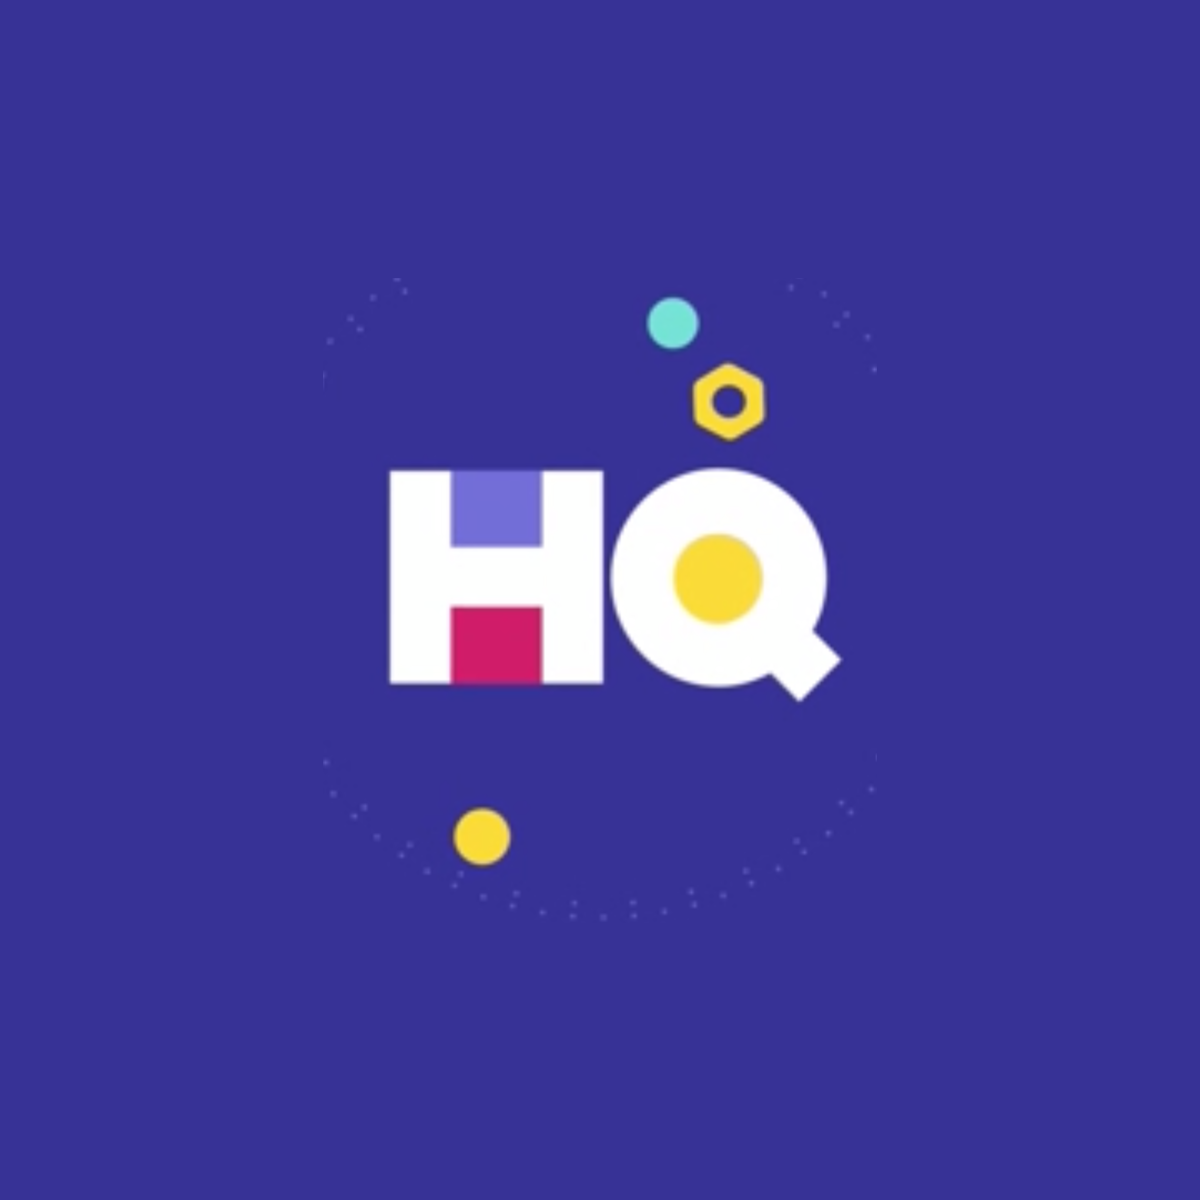 Has HQ, The Mobile Trivia Game App, Redefined Broadcasting?